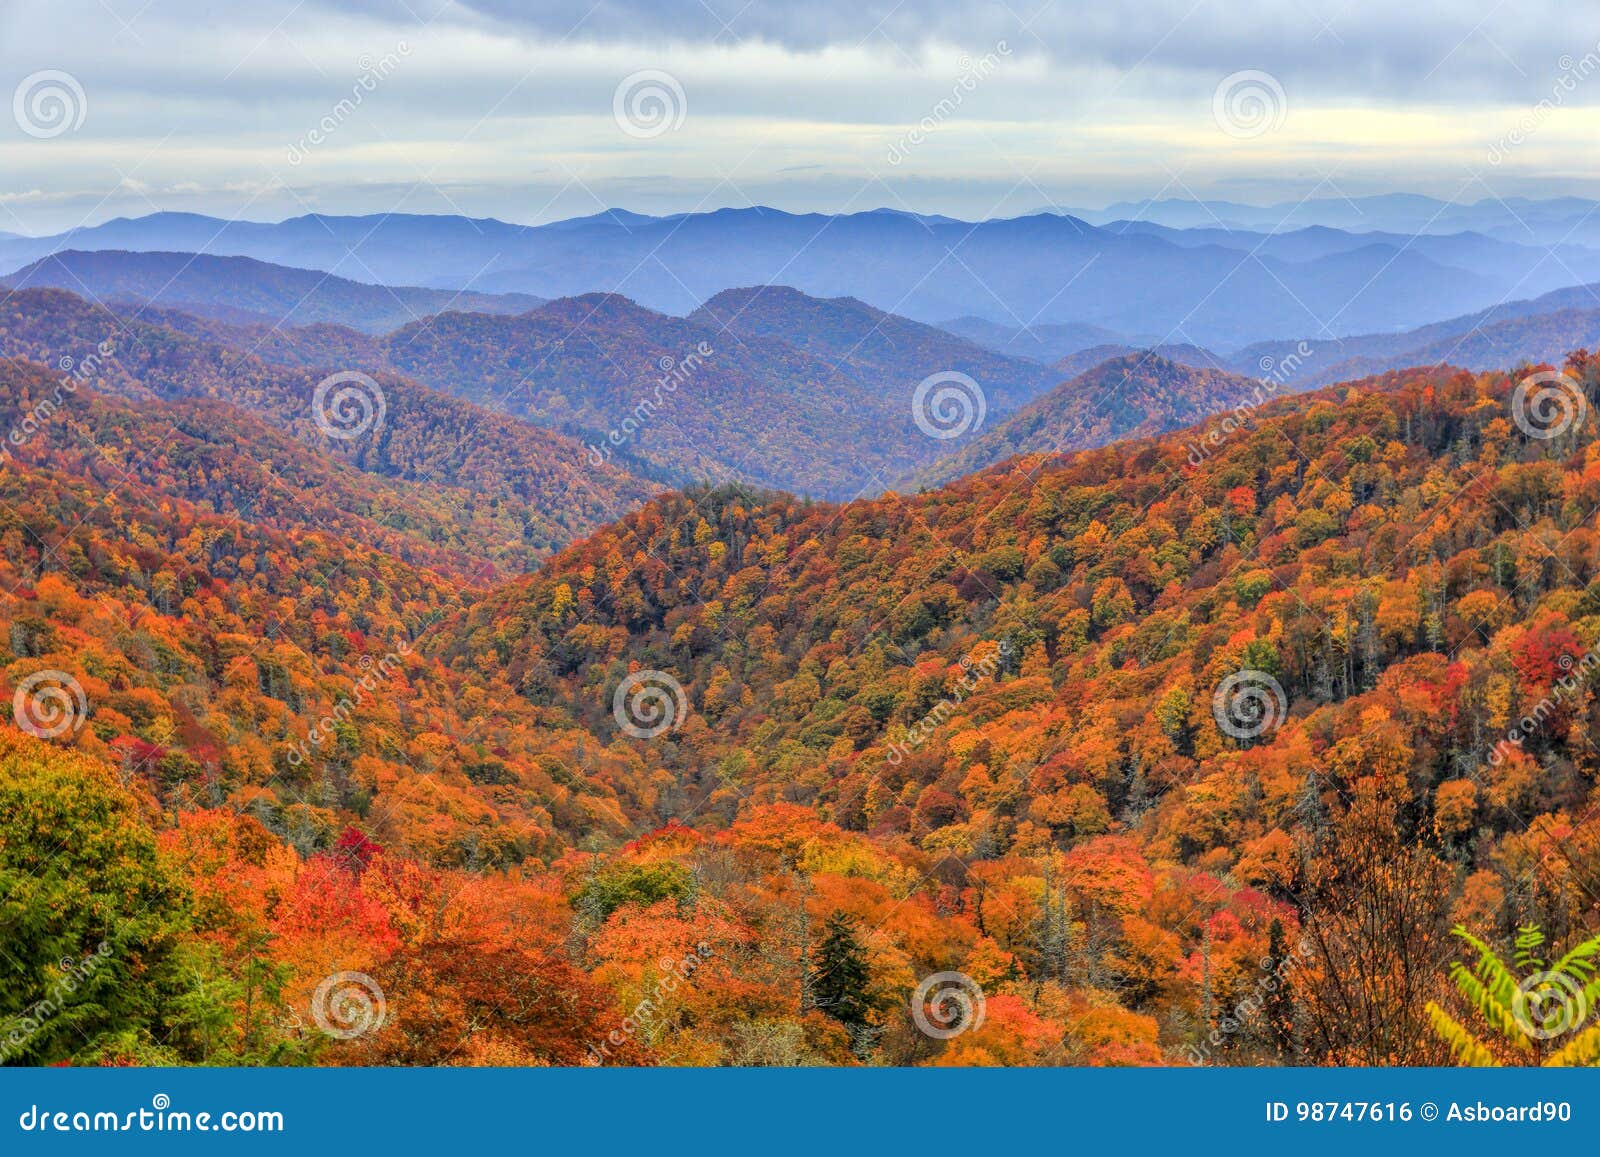 autumn scene in the great smoky mountains